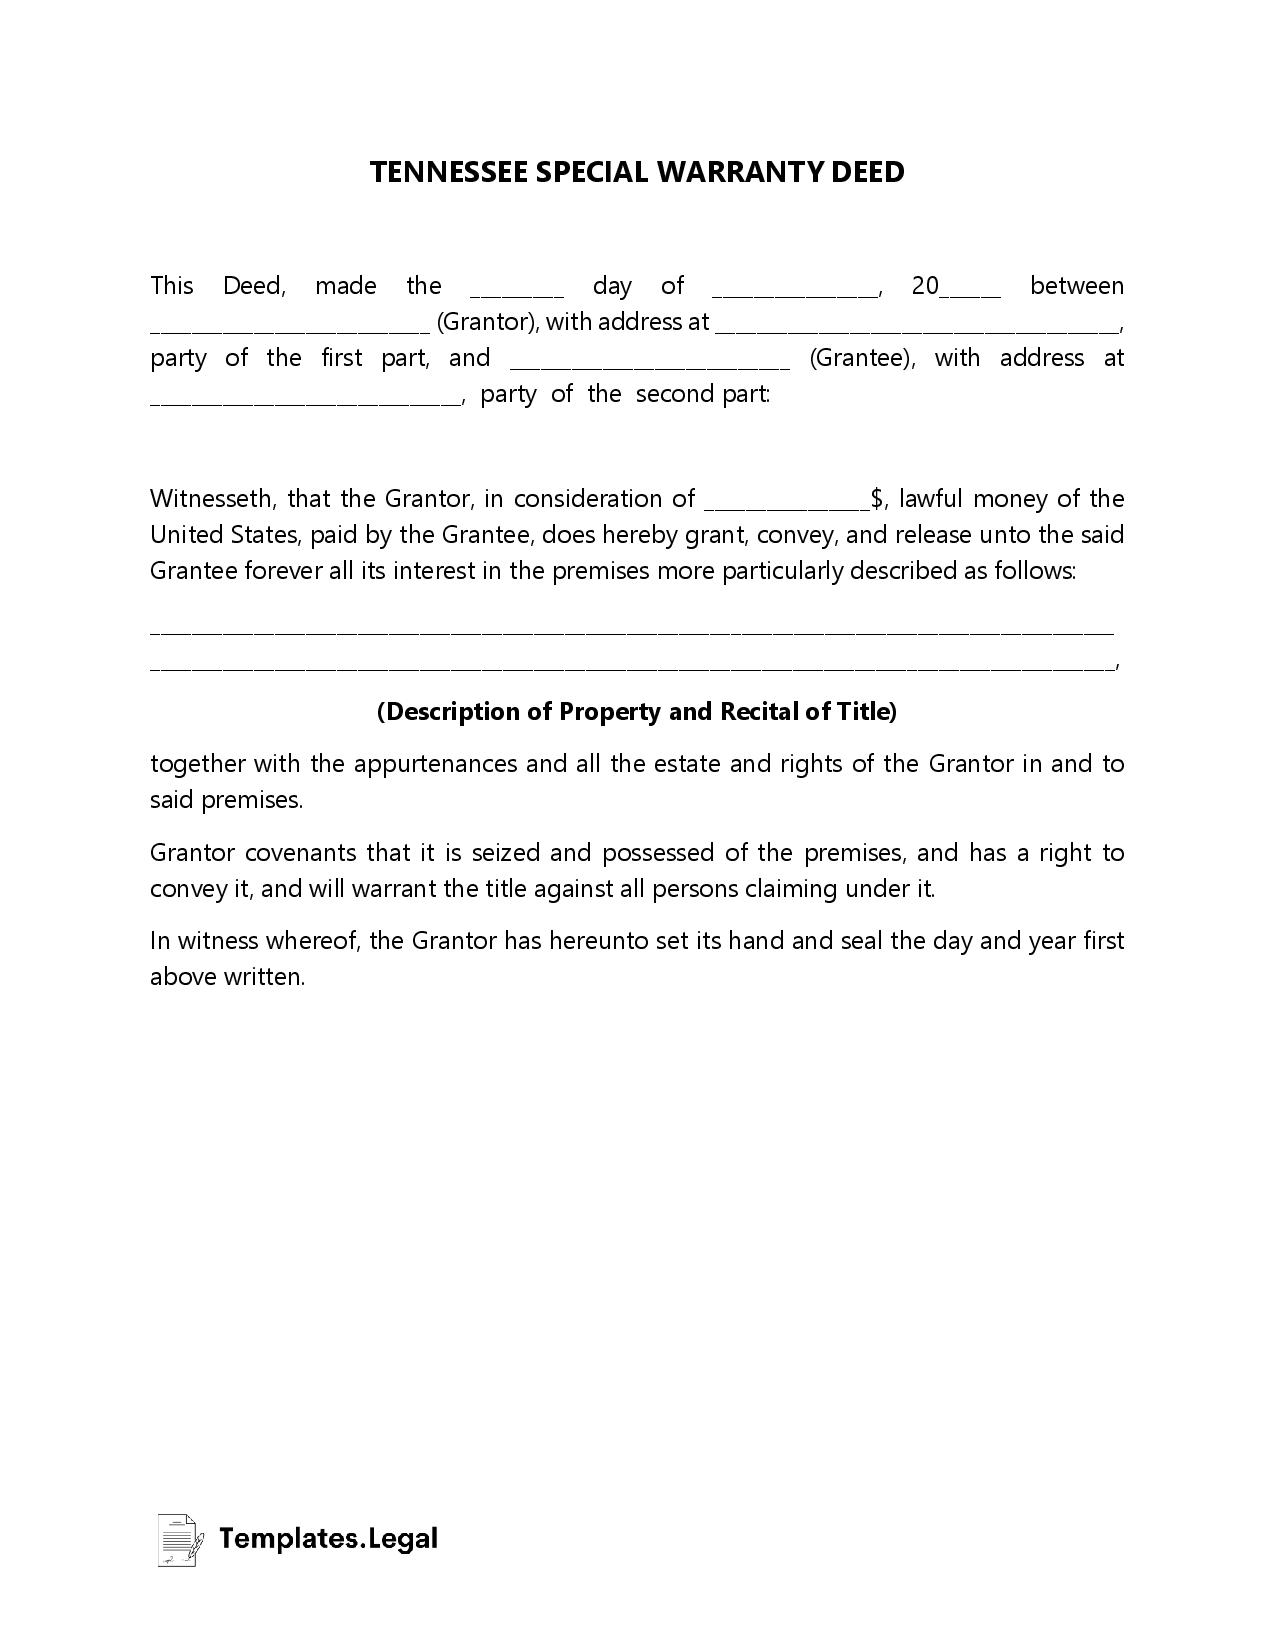 Tennessee Special Warranty Deed - Templates.Legal